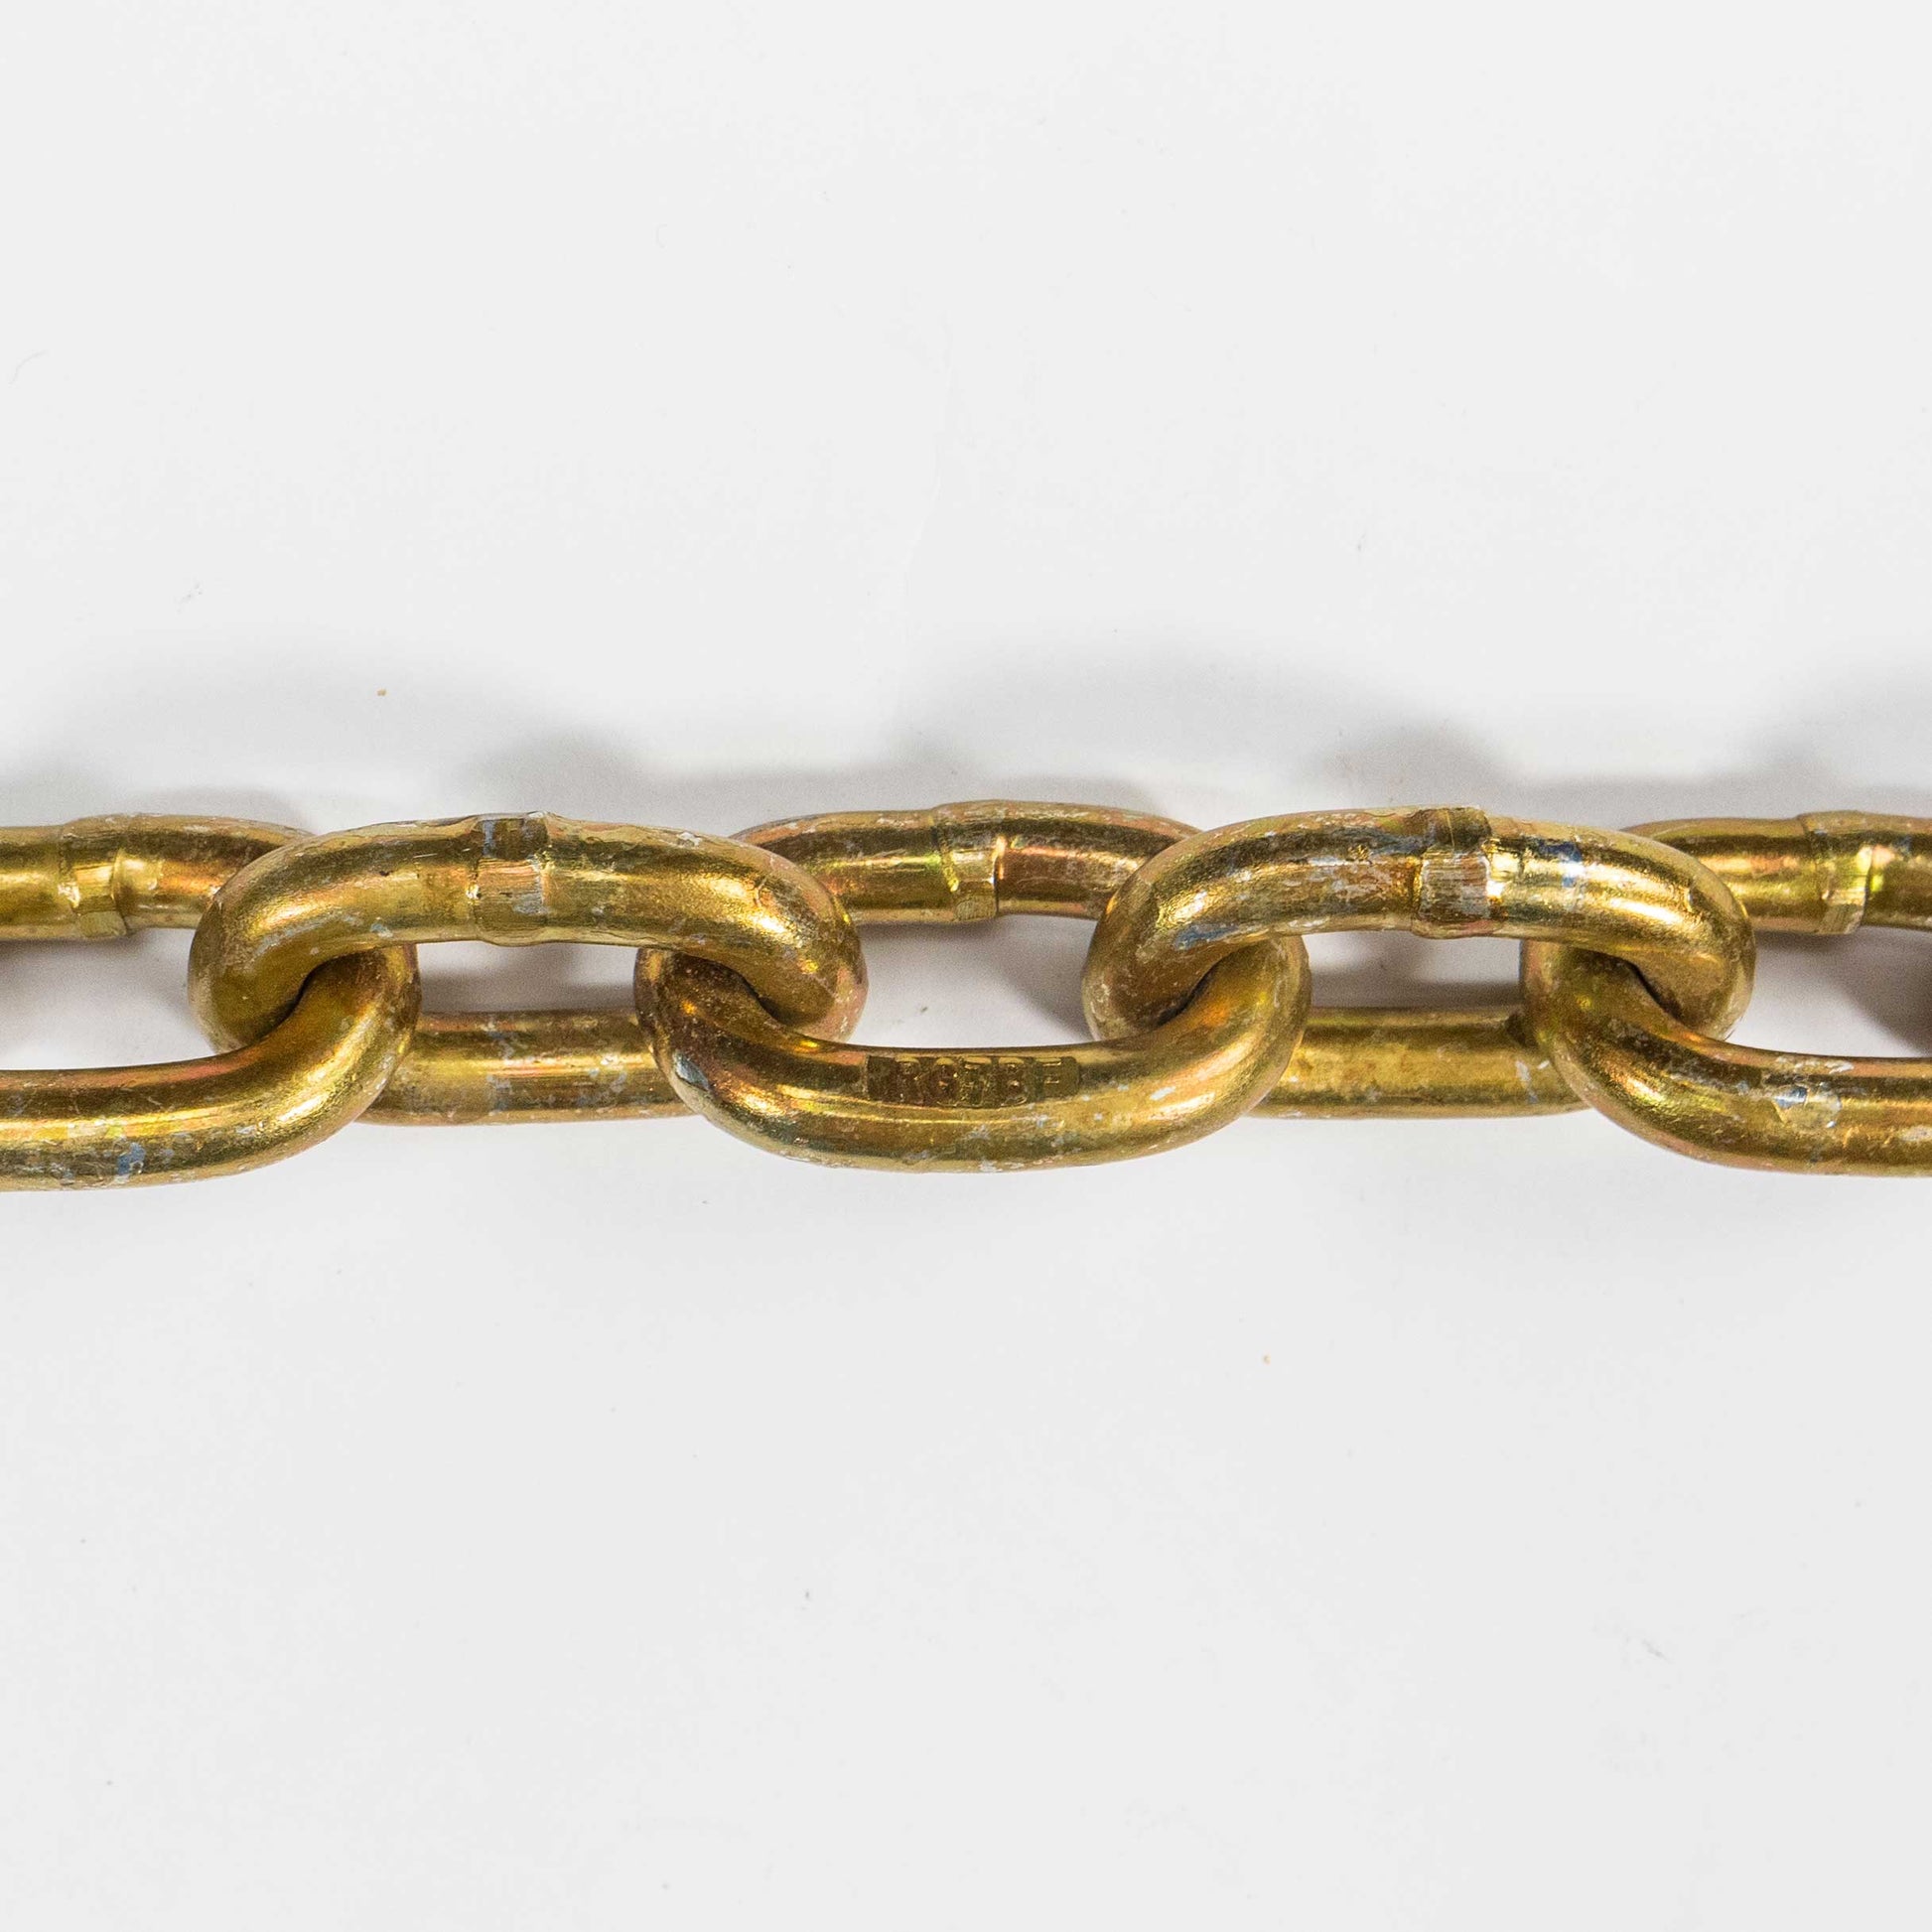 Safety Chain Grade 70 516 inch x 42 inch Pair image 6 of 6